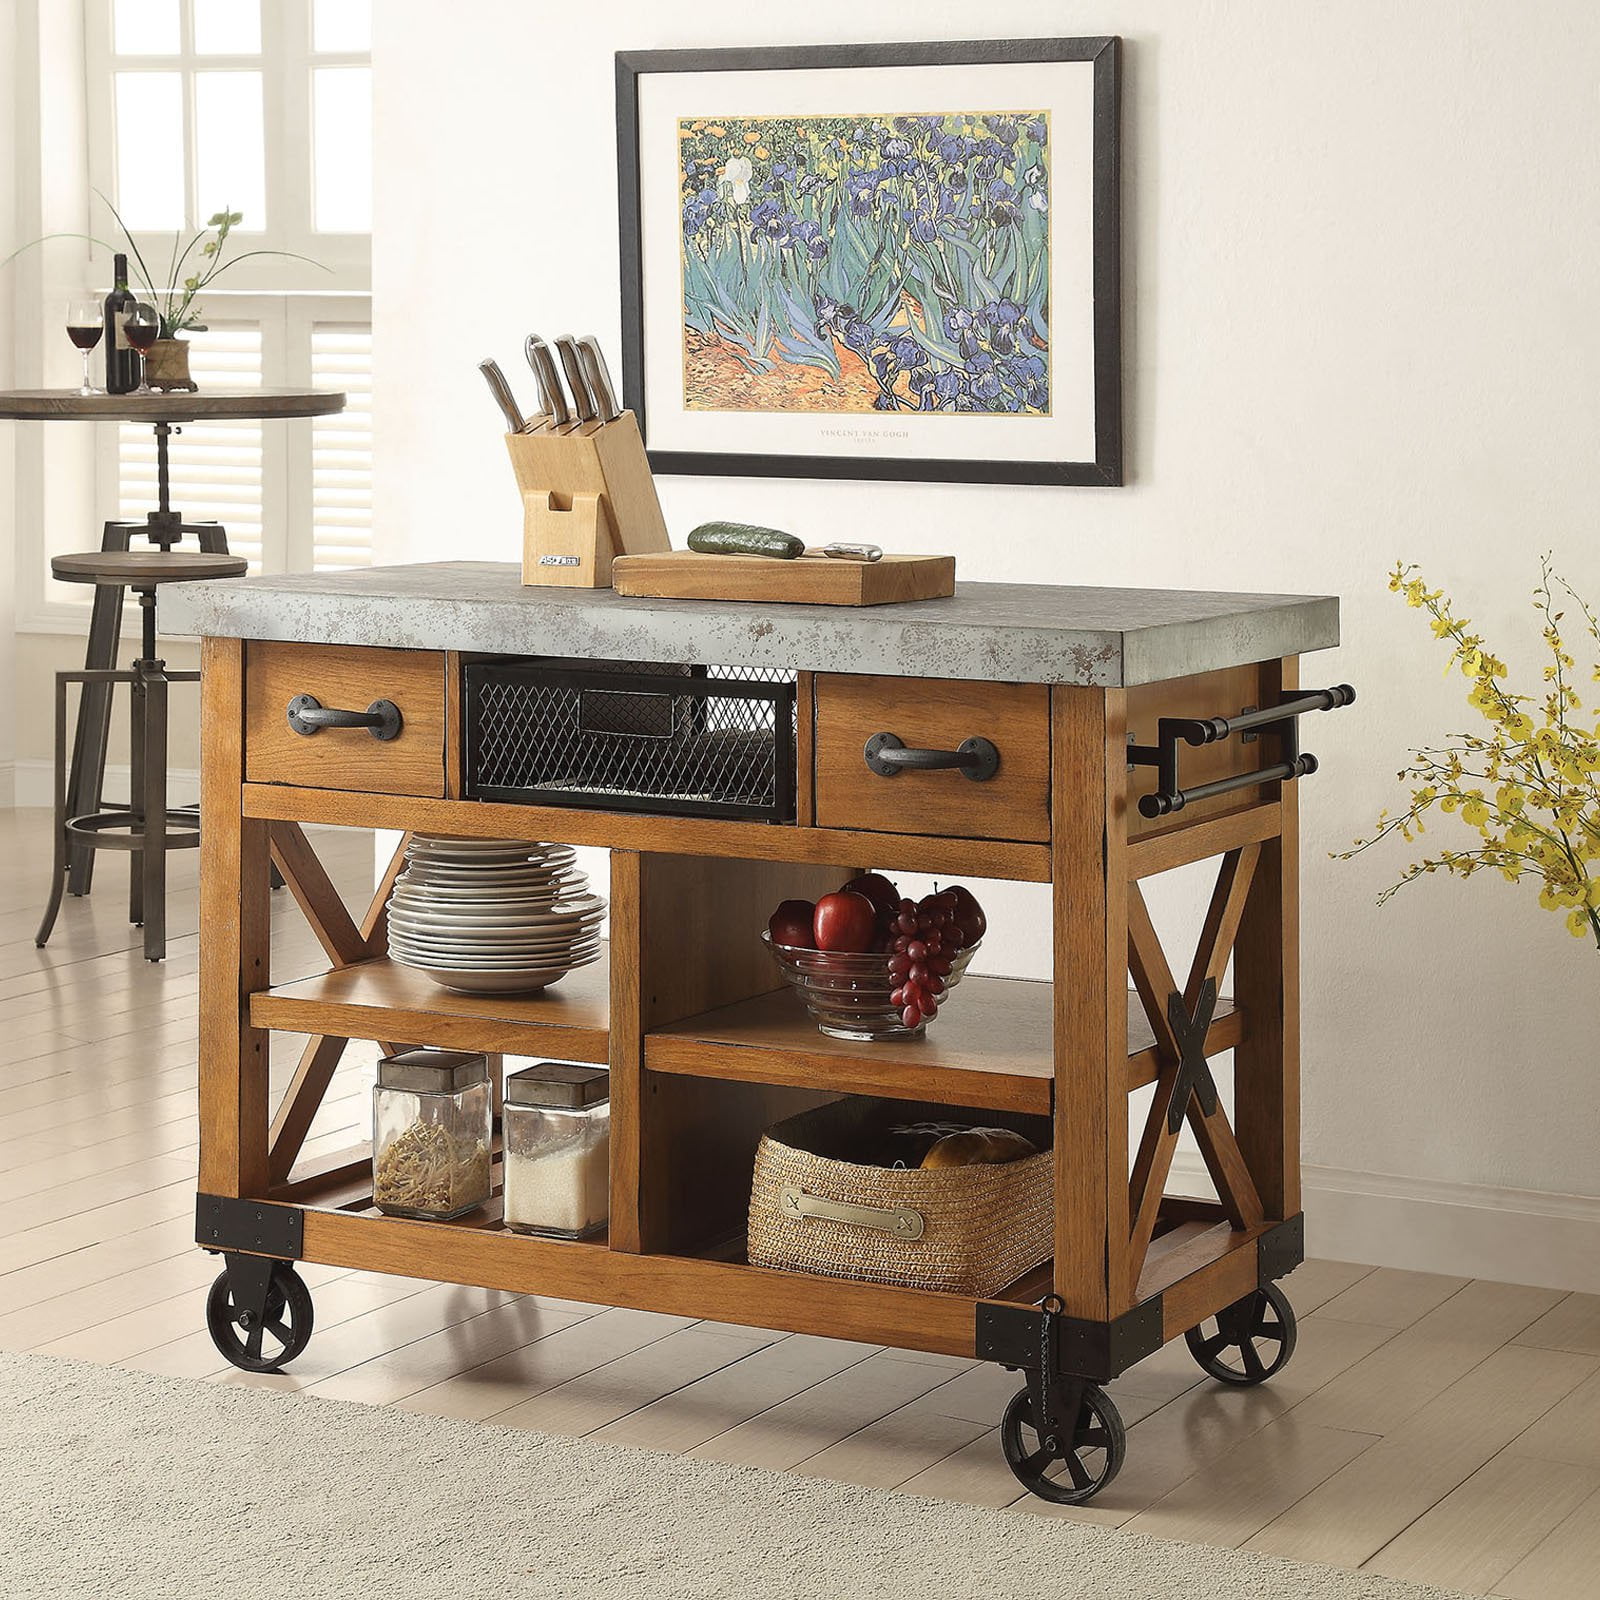 Picture of ACME 98182 Kailey Kitchen Cart, Antique Oak - 36 x 48 x 26 in.